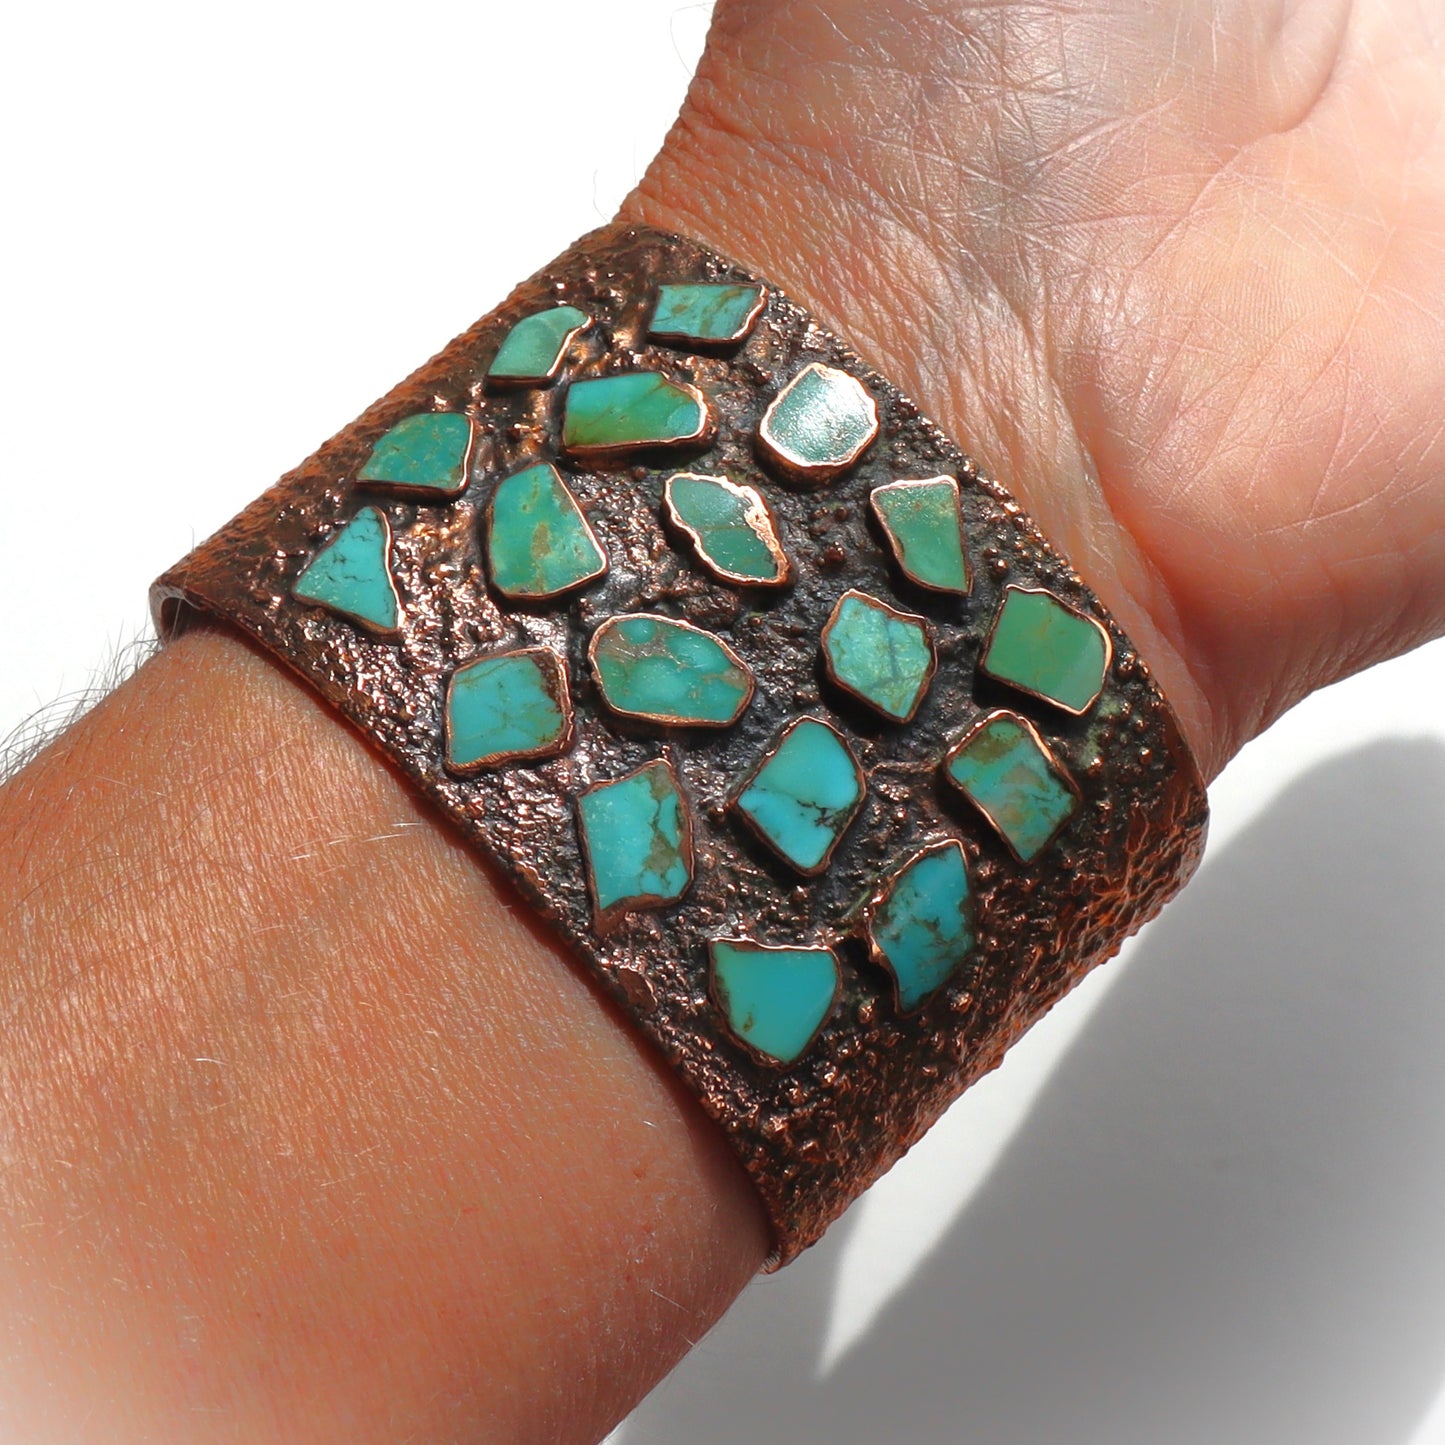 Vintage Mid Century Modern Solid Copper Bell Turquoise Inlaid Molten Cuff Bracelet